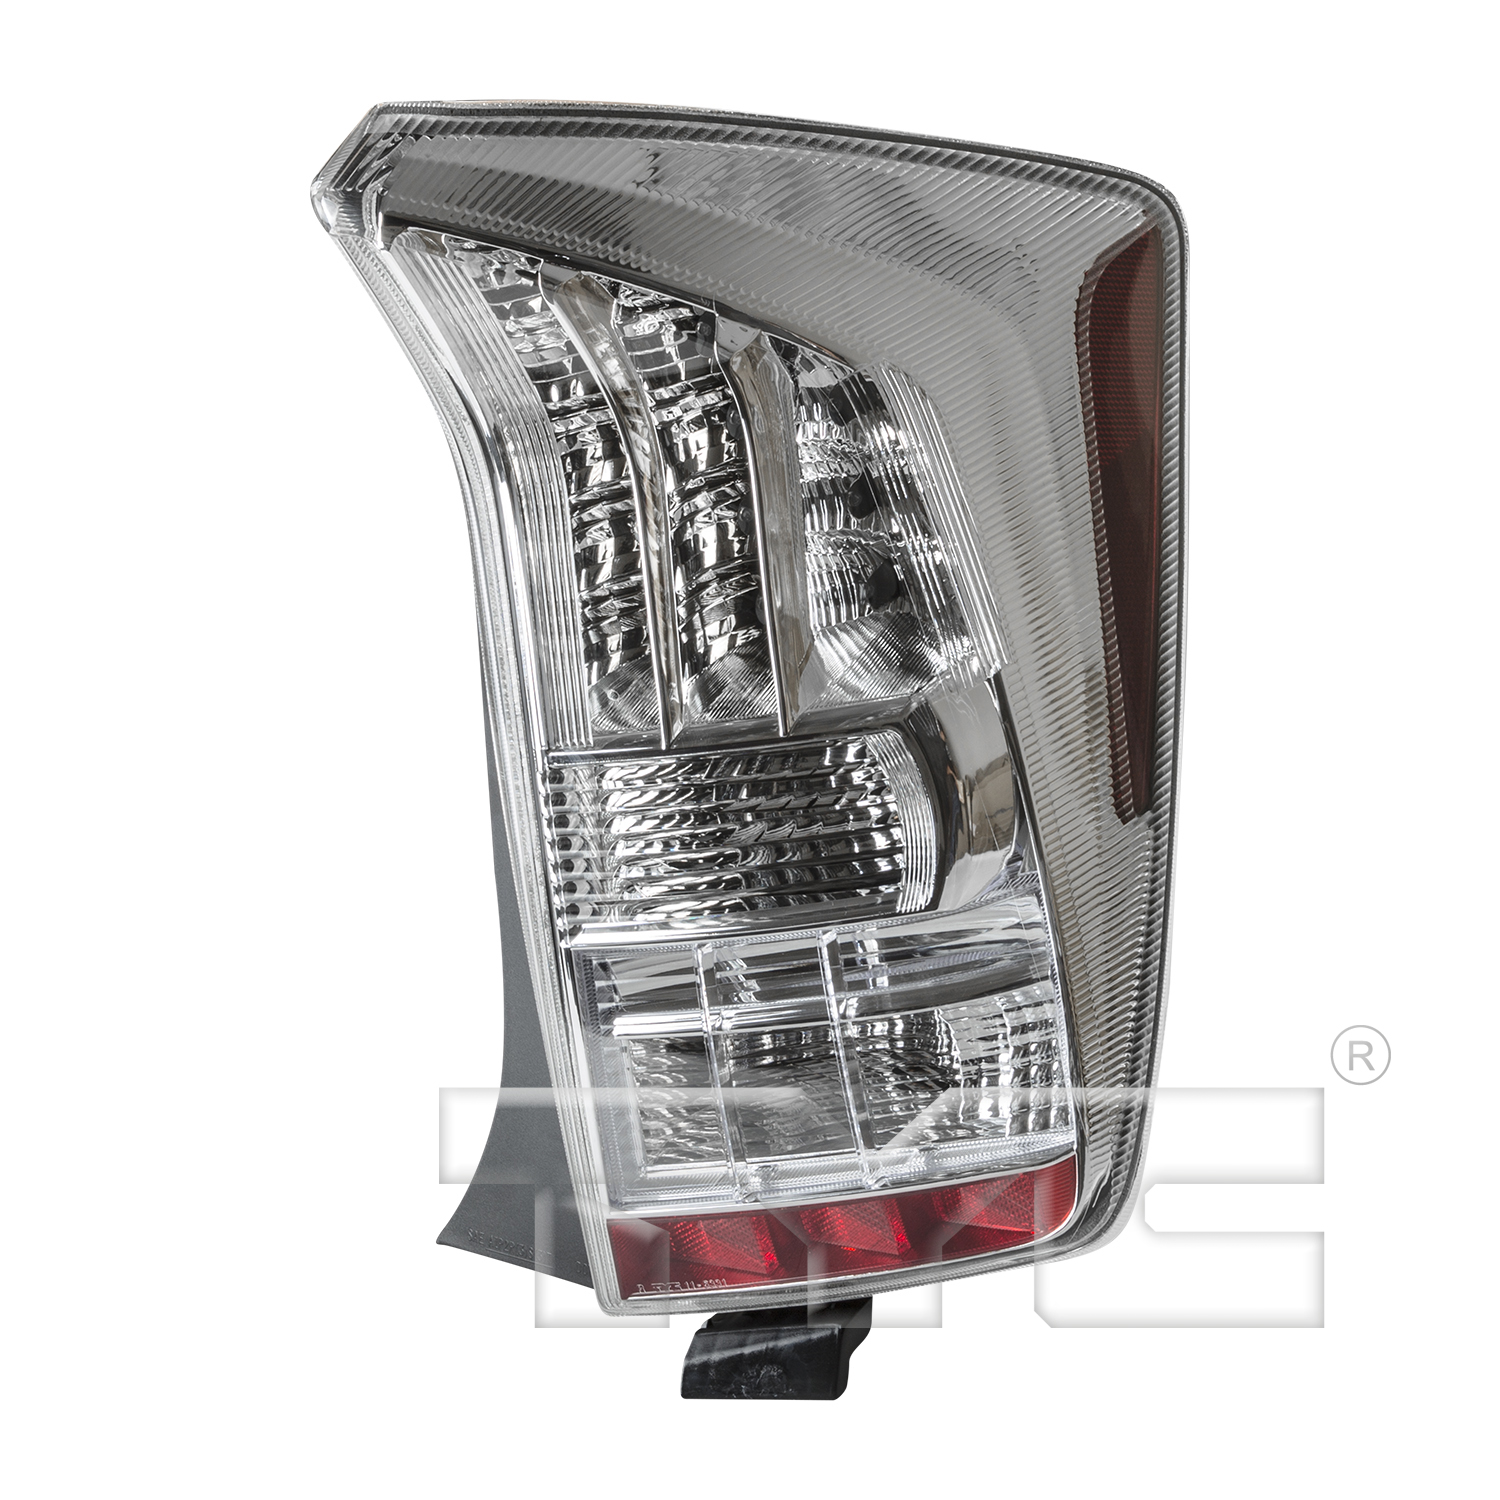 Aftermarket TAILLIGHTS for TOYOTA - PRIUS, PRIUS,10-11,RT Taillamp lens/housing